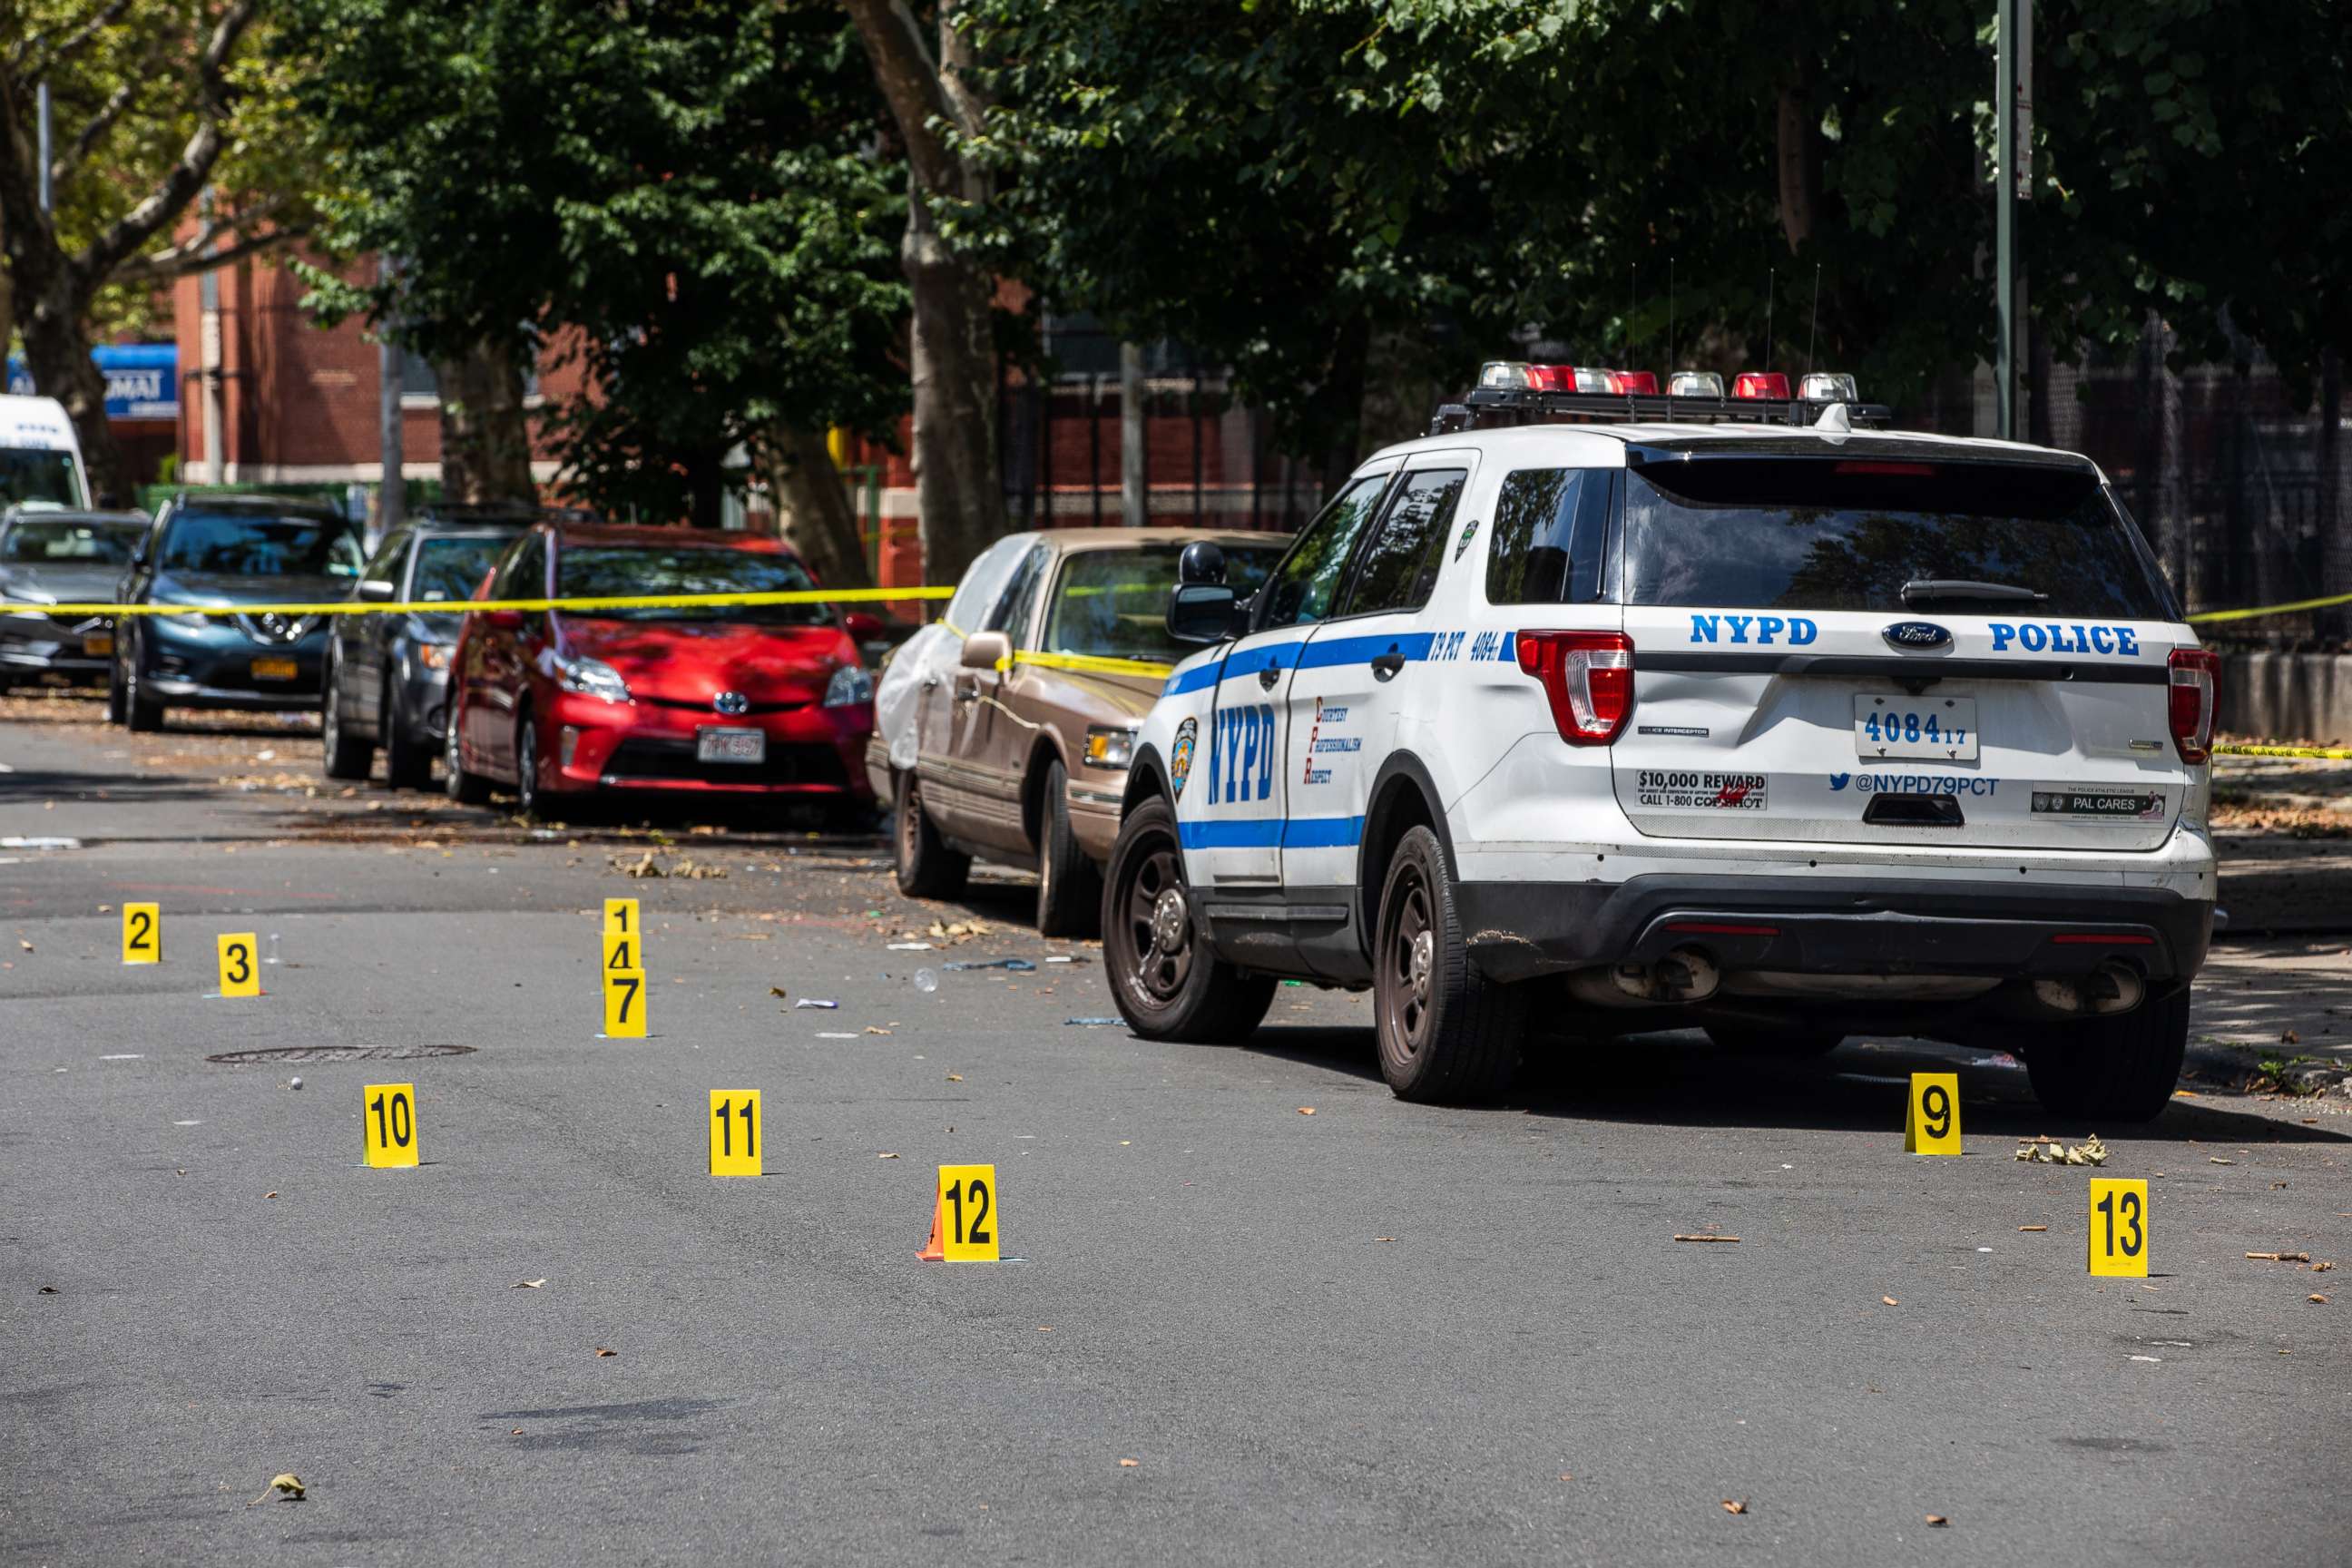 PHOTO: Evidence markers in the street outside of Raymond Bush Playground in Brooklyn, on Monday, July 13, 2020.